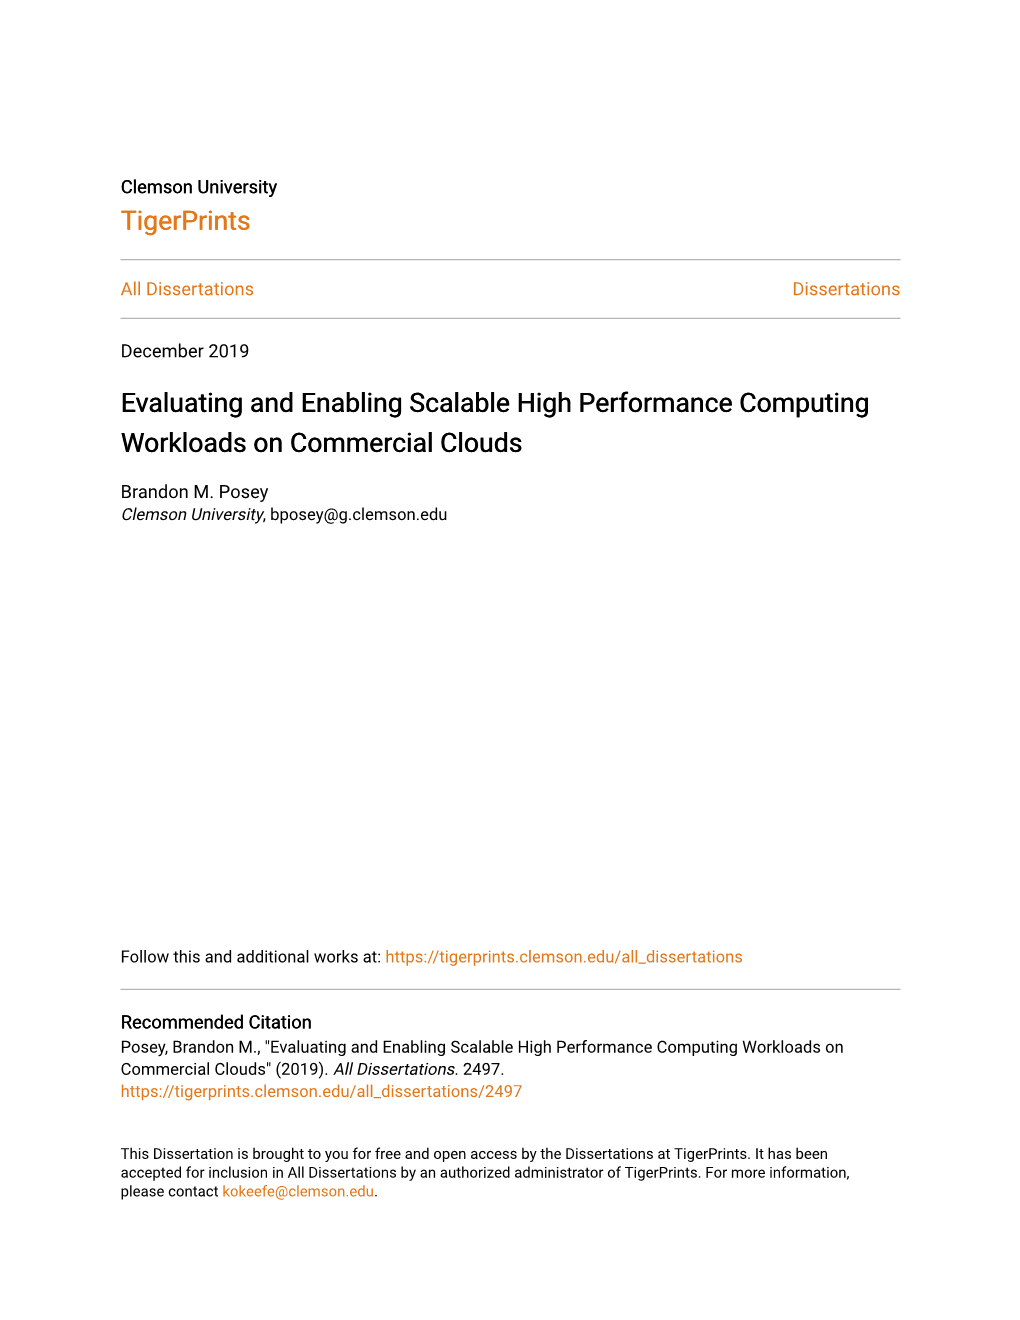 Evaluating and Enabling Scalable High Performance Computing Workloads on Commercial Clouds